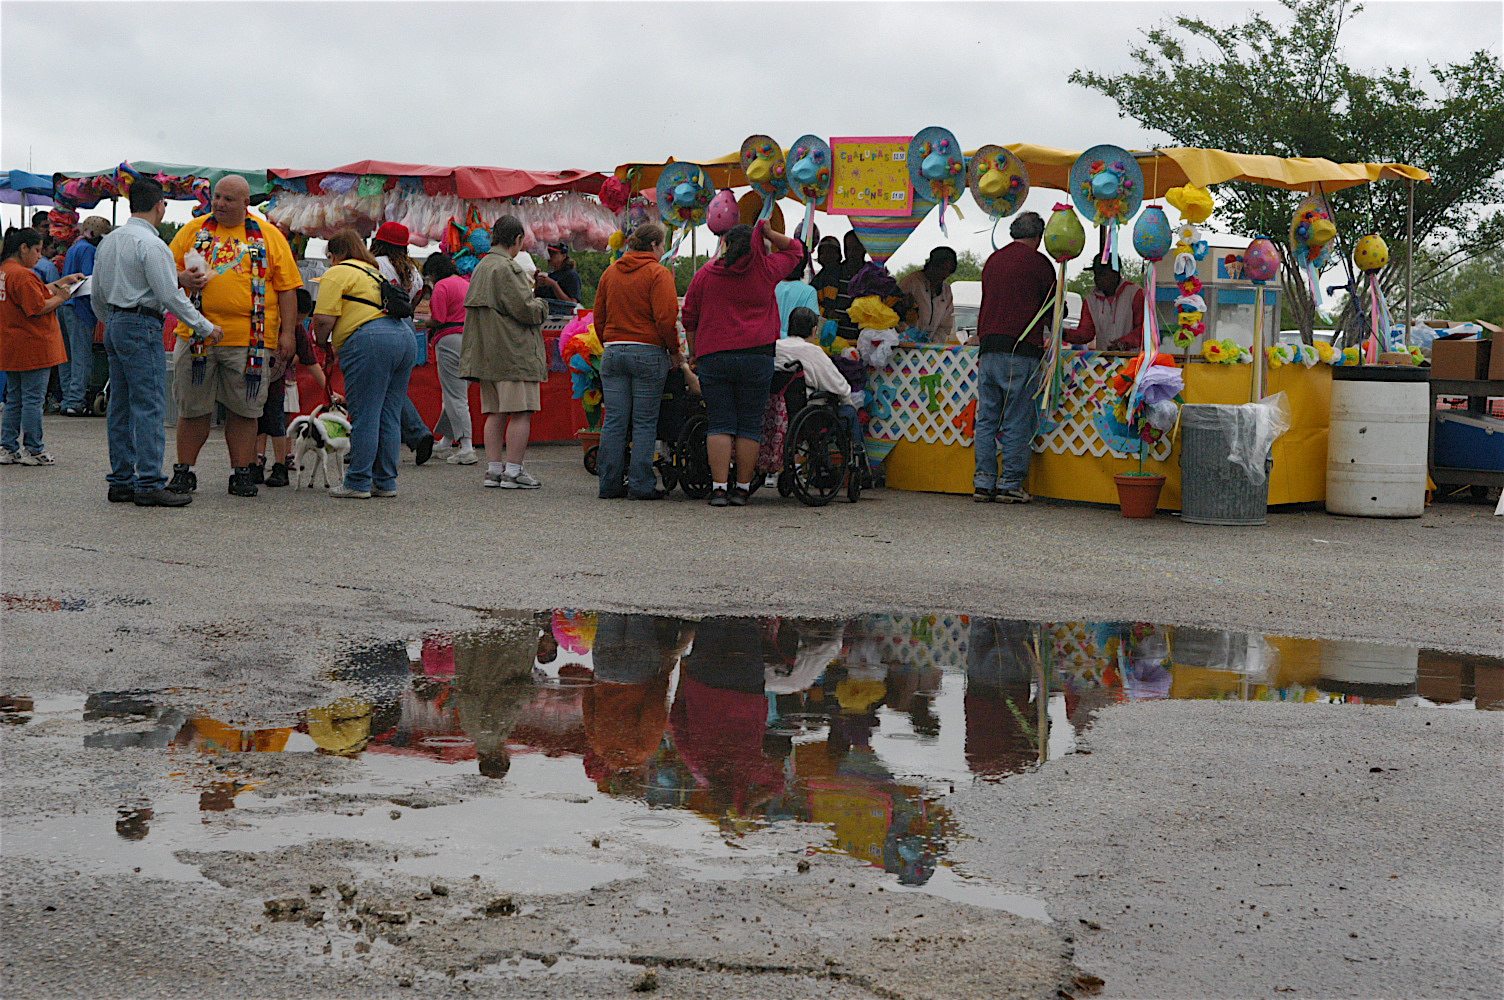 Group of people in line at a vendor at a small festival with a puddle in the foreground